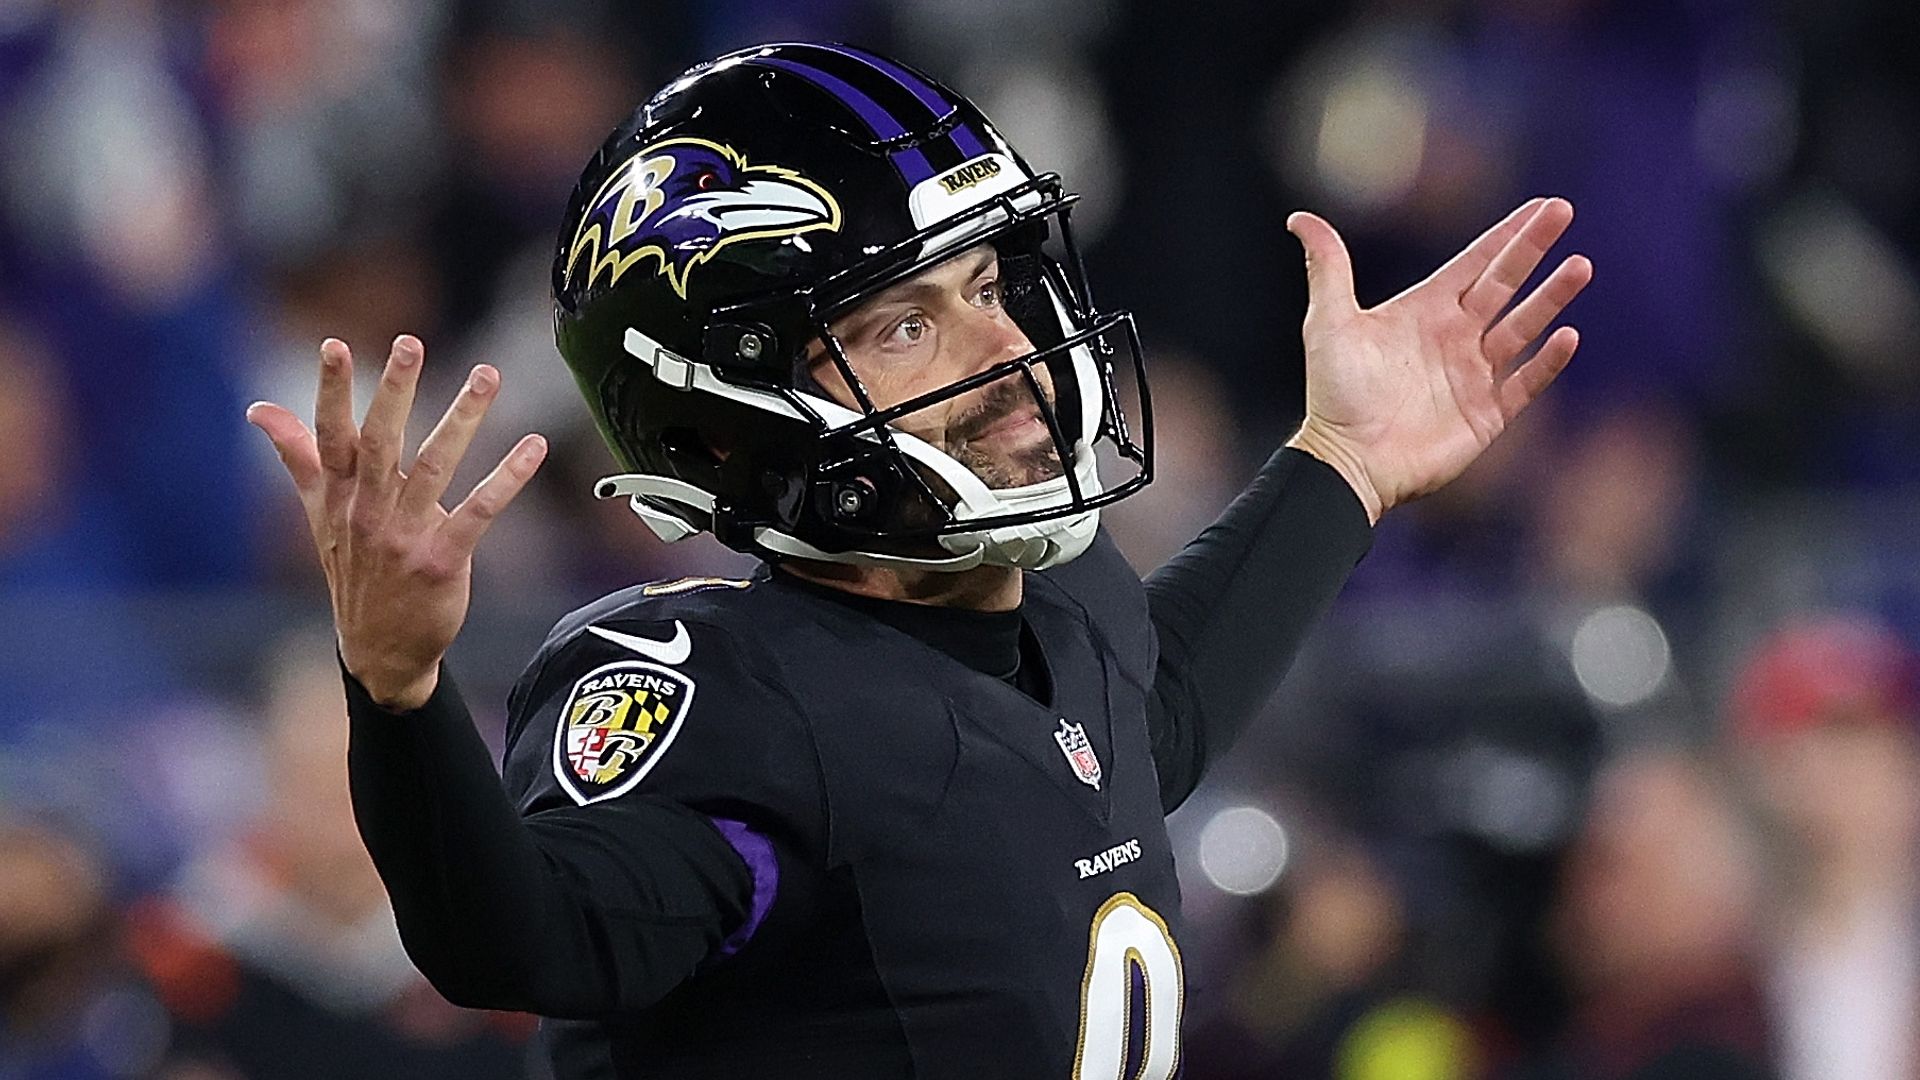 Ravens edge out Bengals in dramatic finish